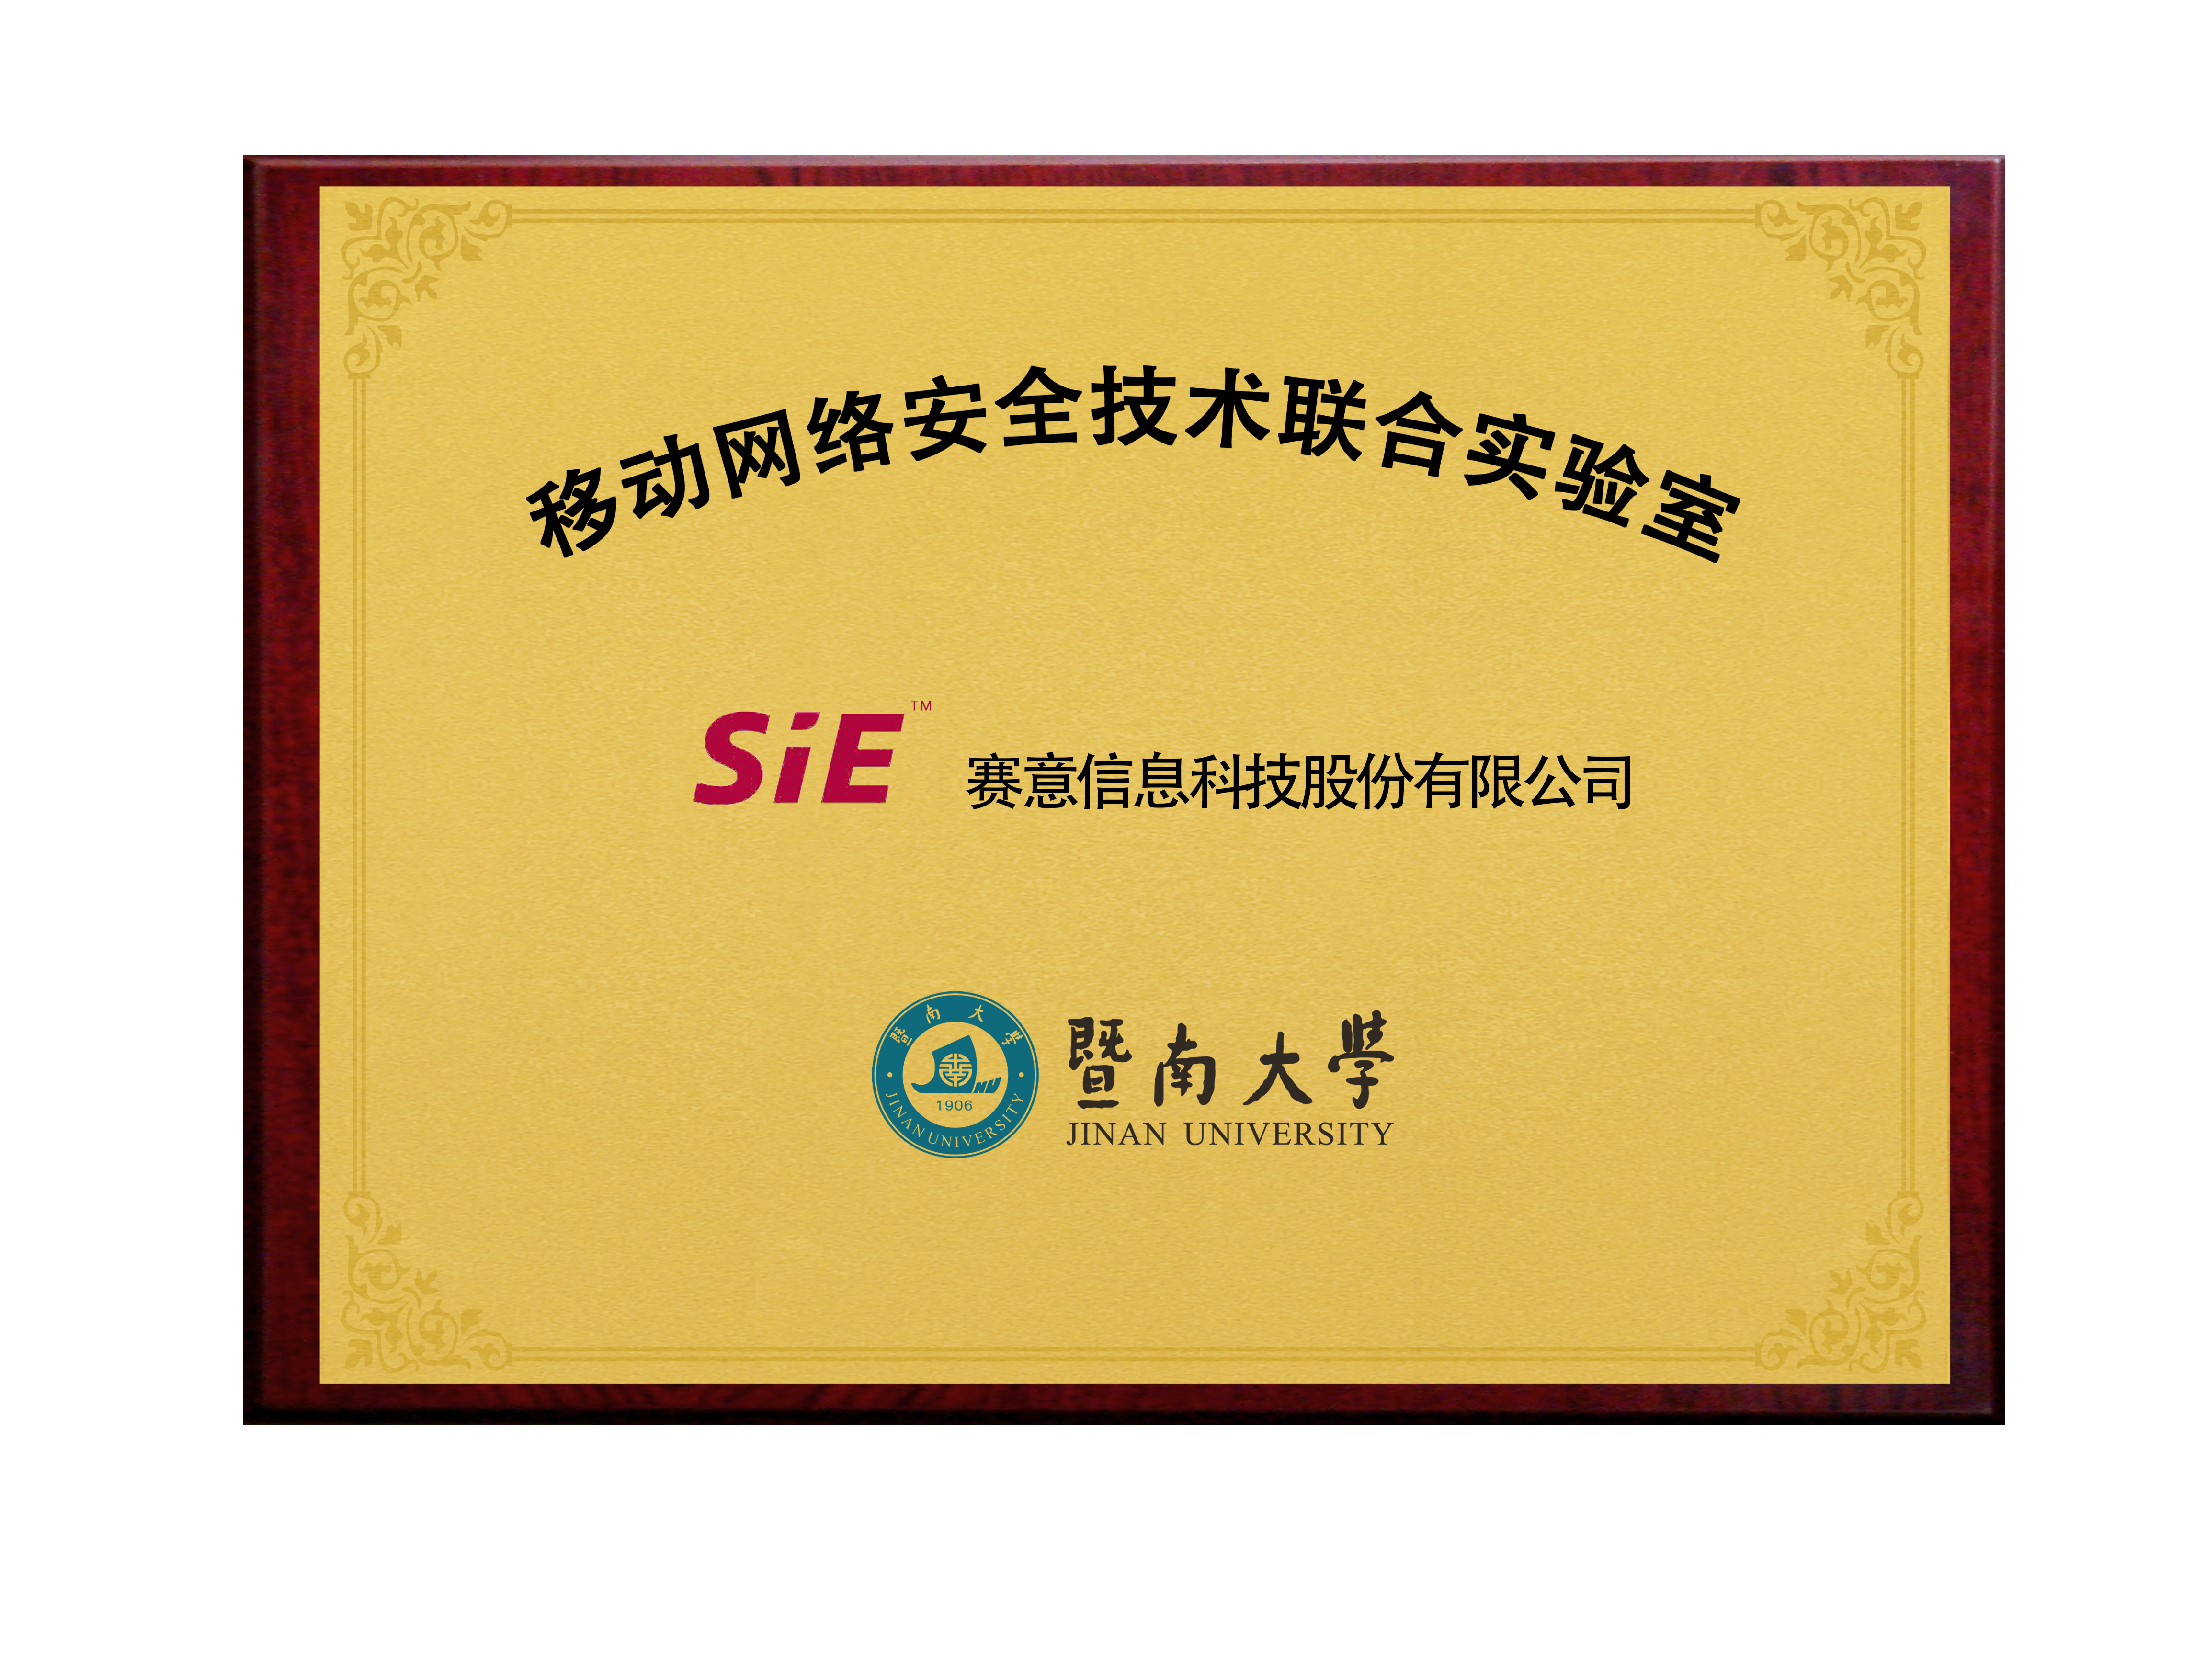 SIE&Jinan University Mobile Network Security Technology Joint Laboratory